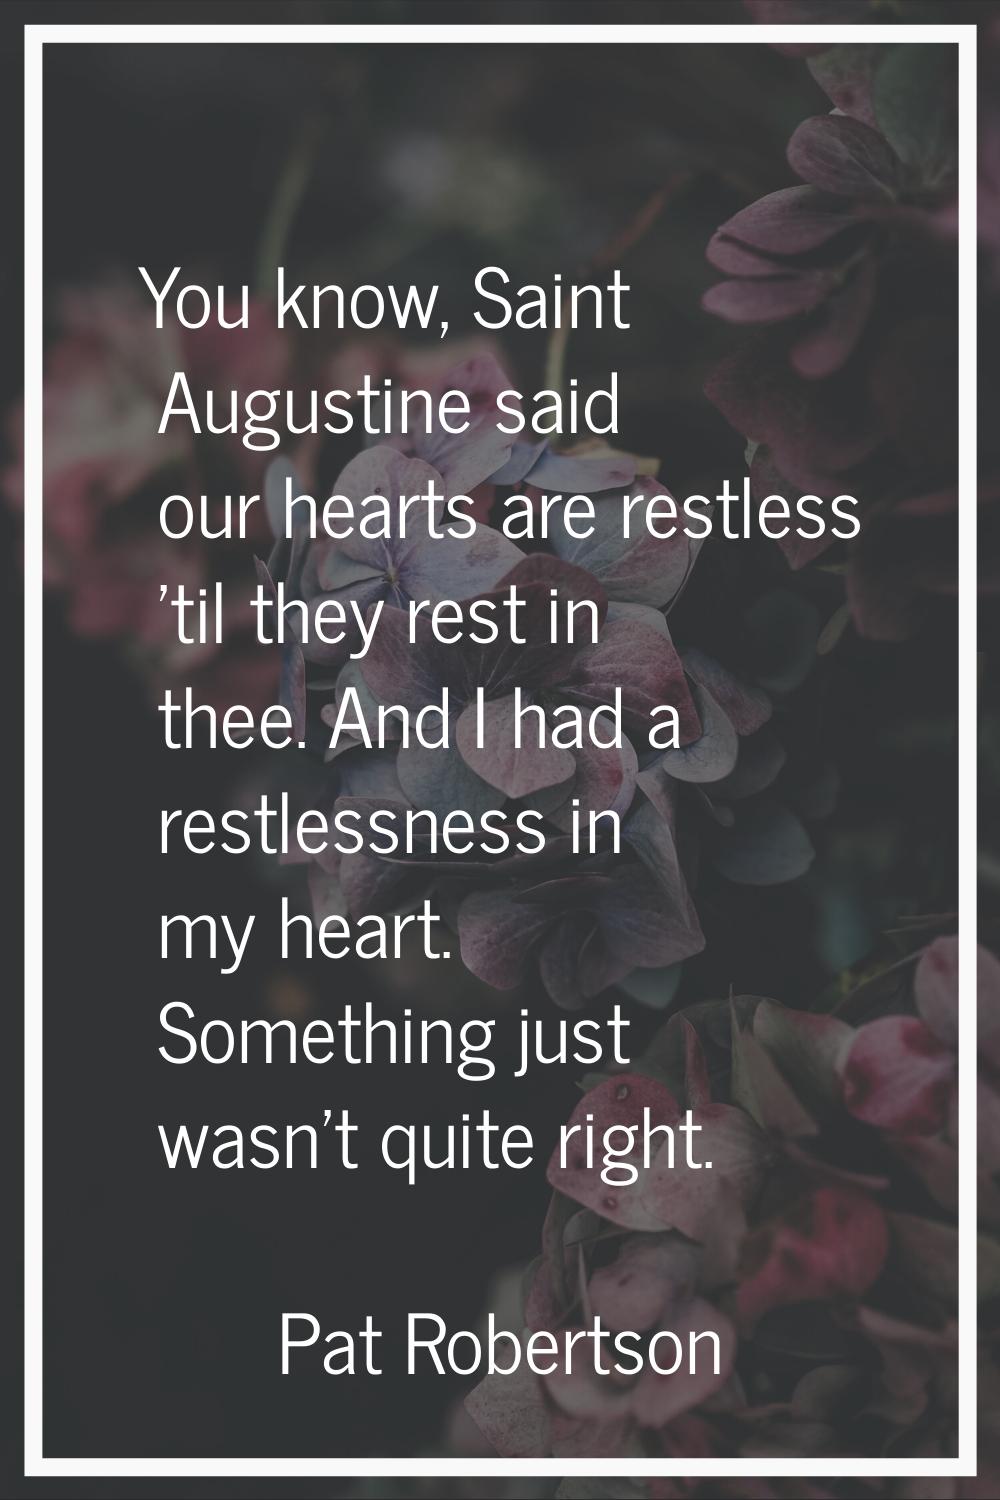 You know, Saint Augustine said our hearts are restless 'til they rest in thee. And I had a restless